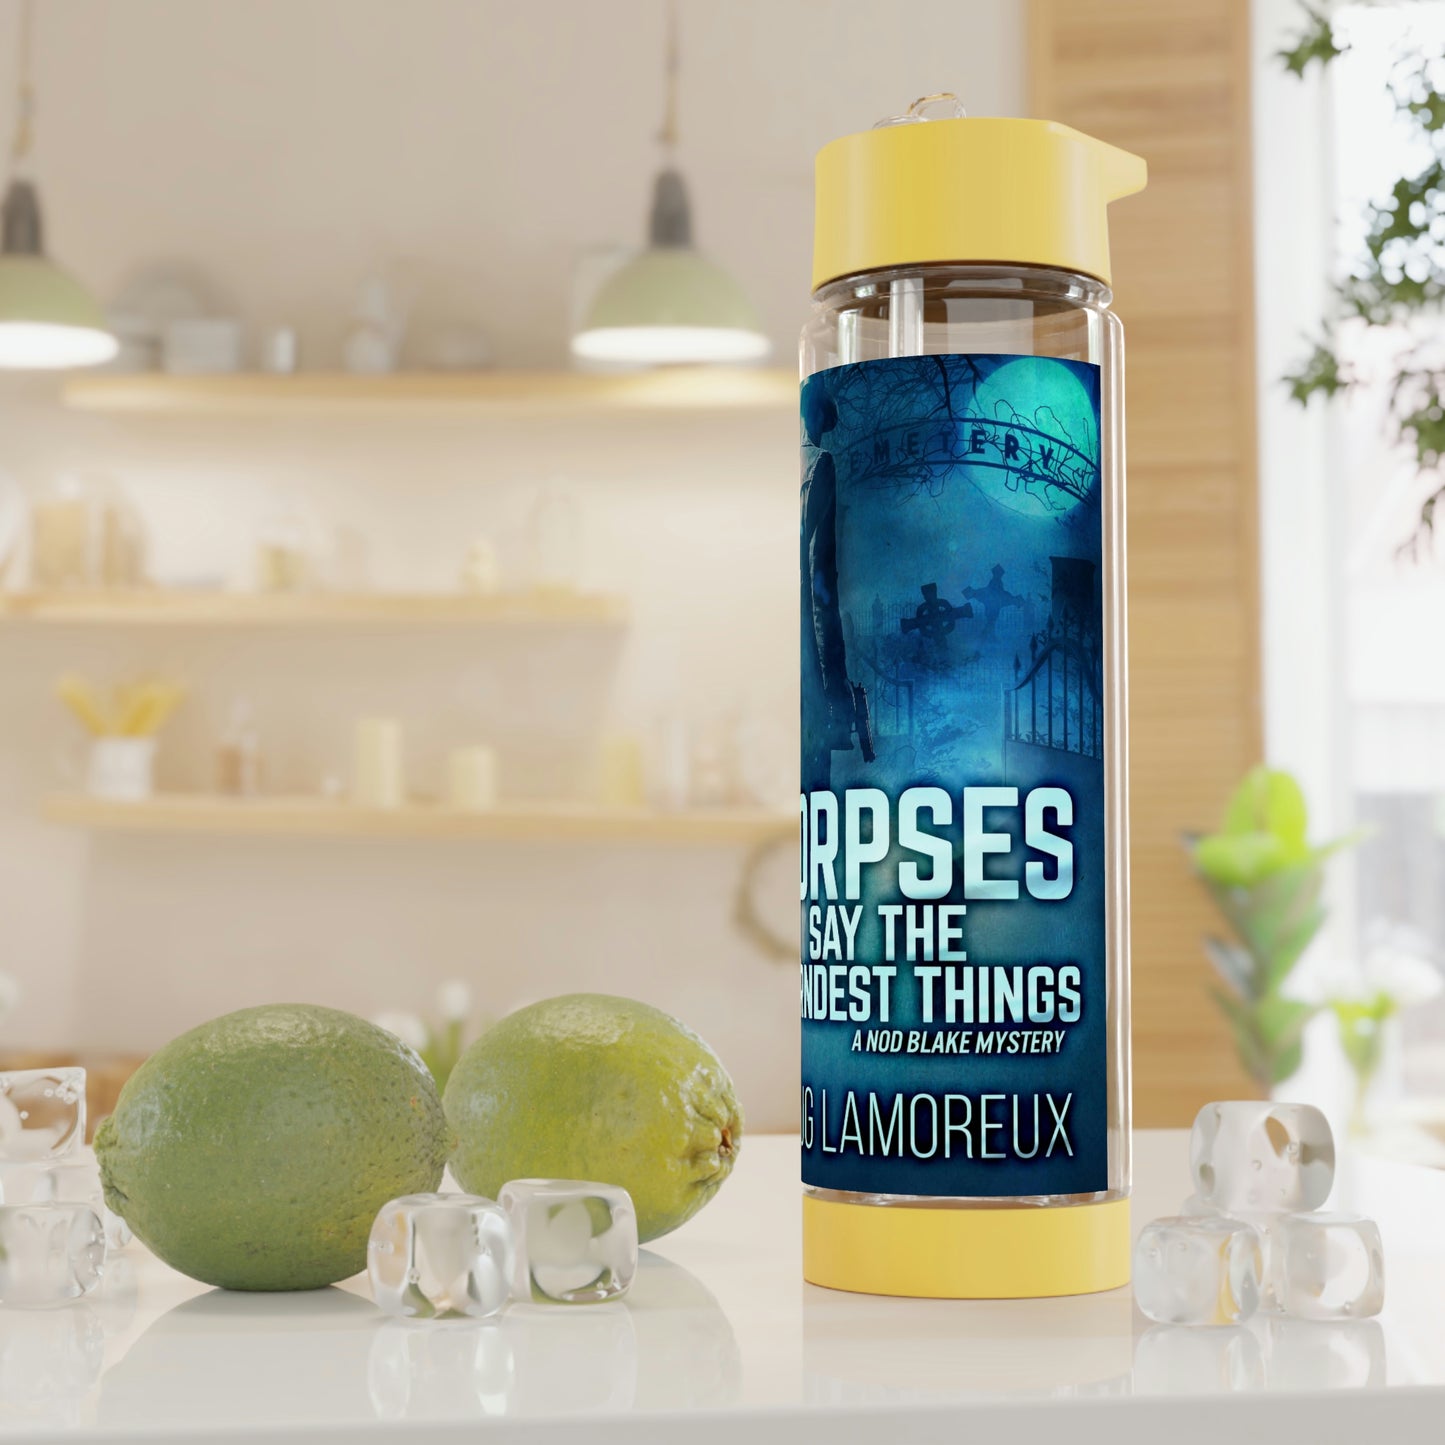 Corpses Say The Darndest Things - Infuser Water Bottle